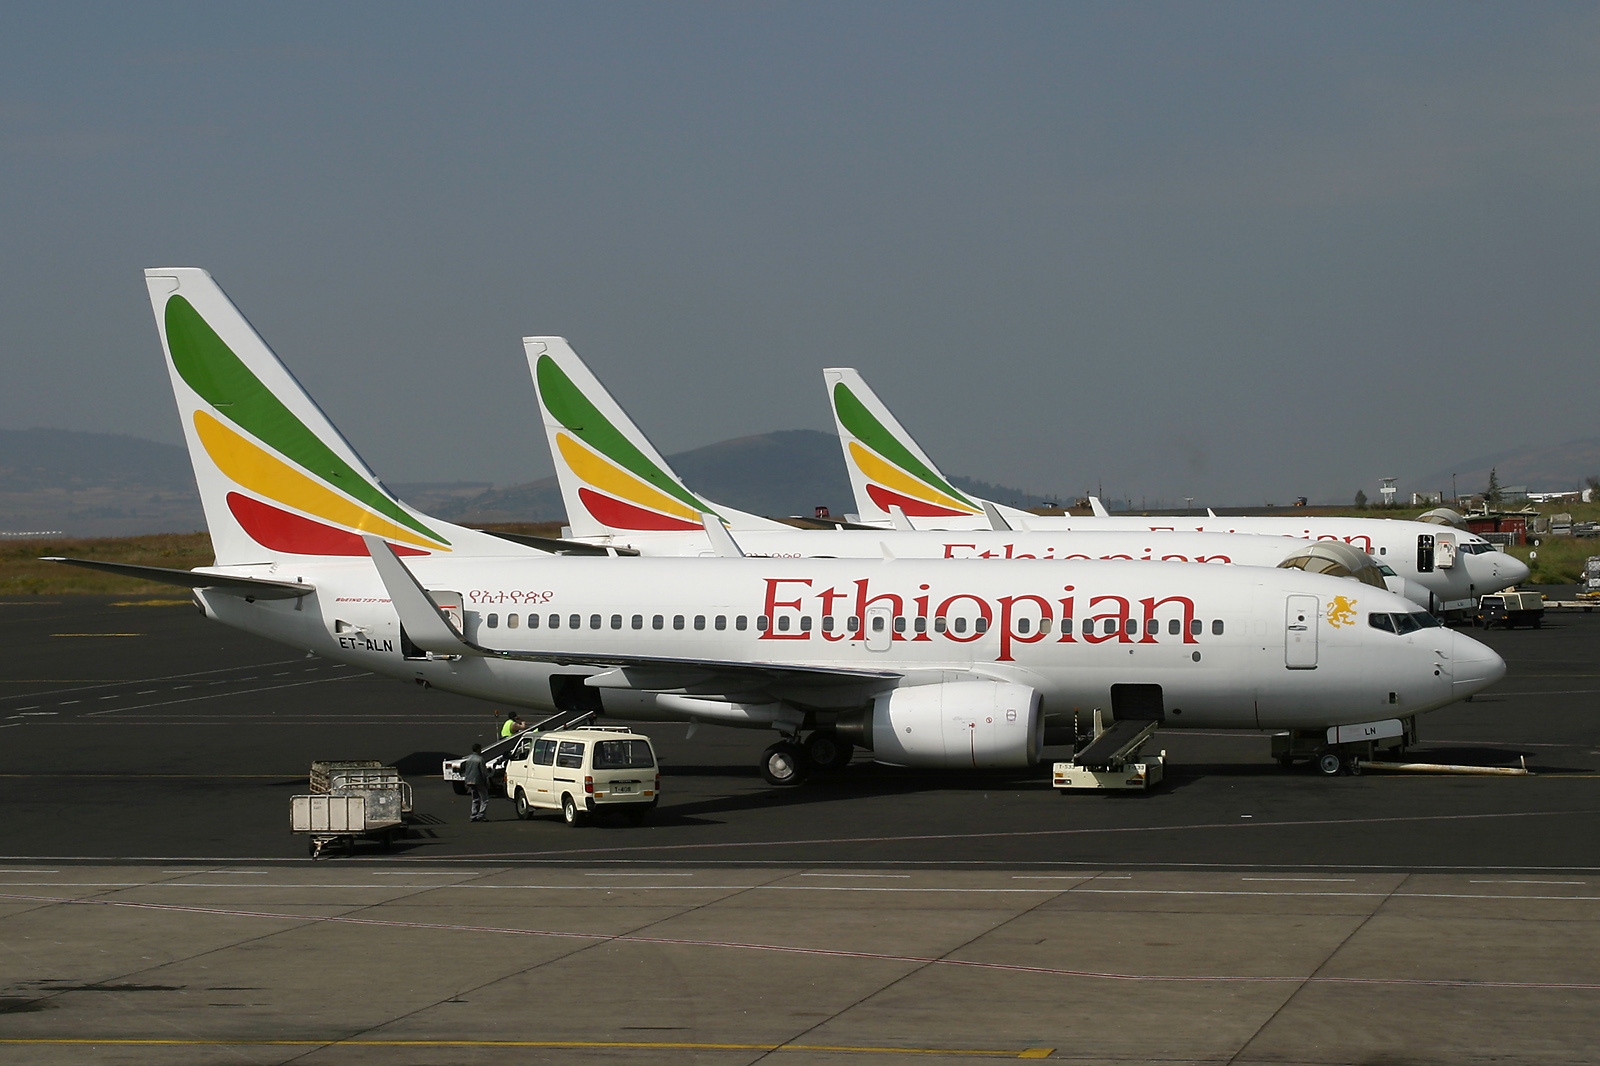 https://www.document.no/wp-content/uploads/2019/05/boeing-737-760-ethiopian-airlines-an0959295.jpg